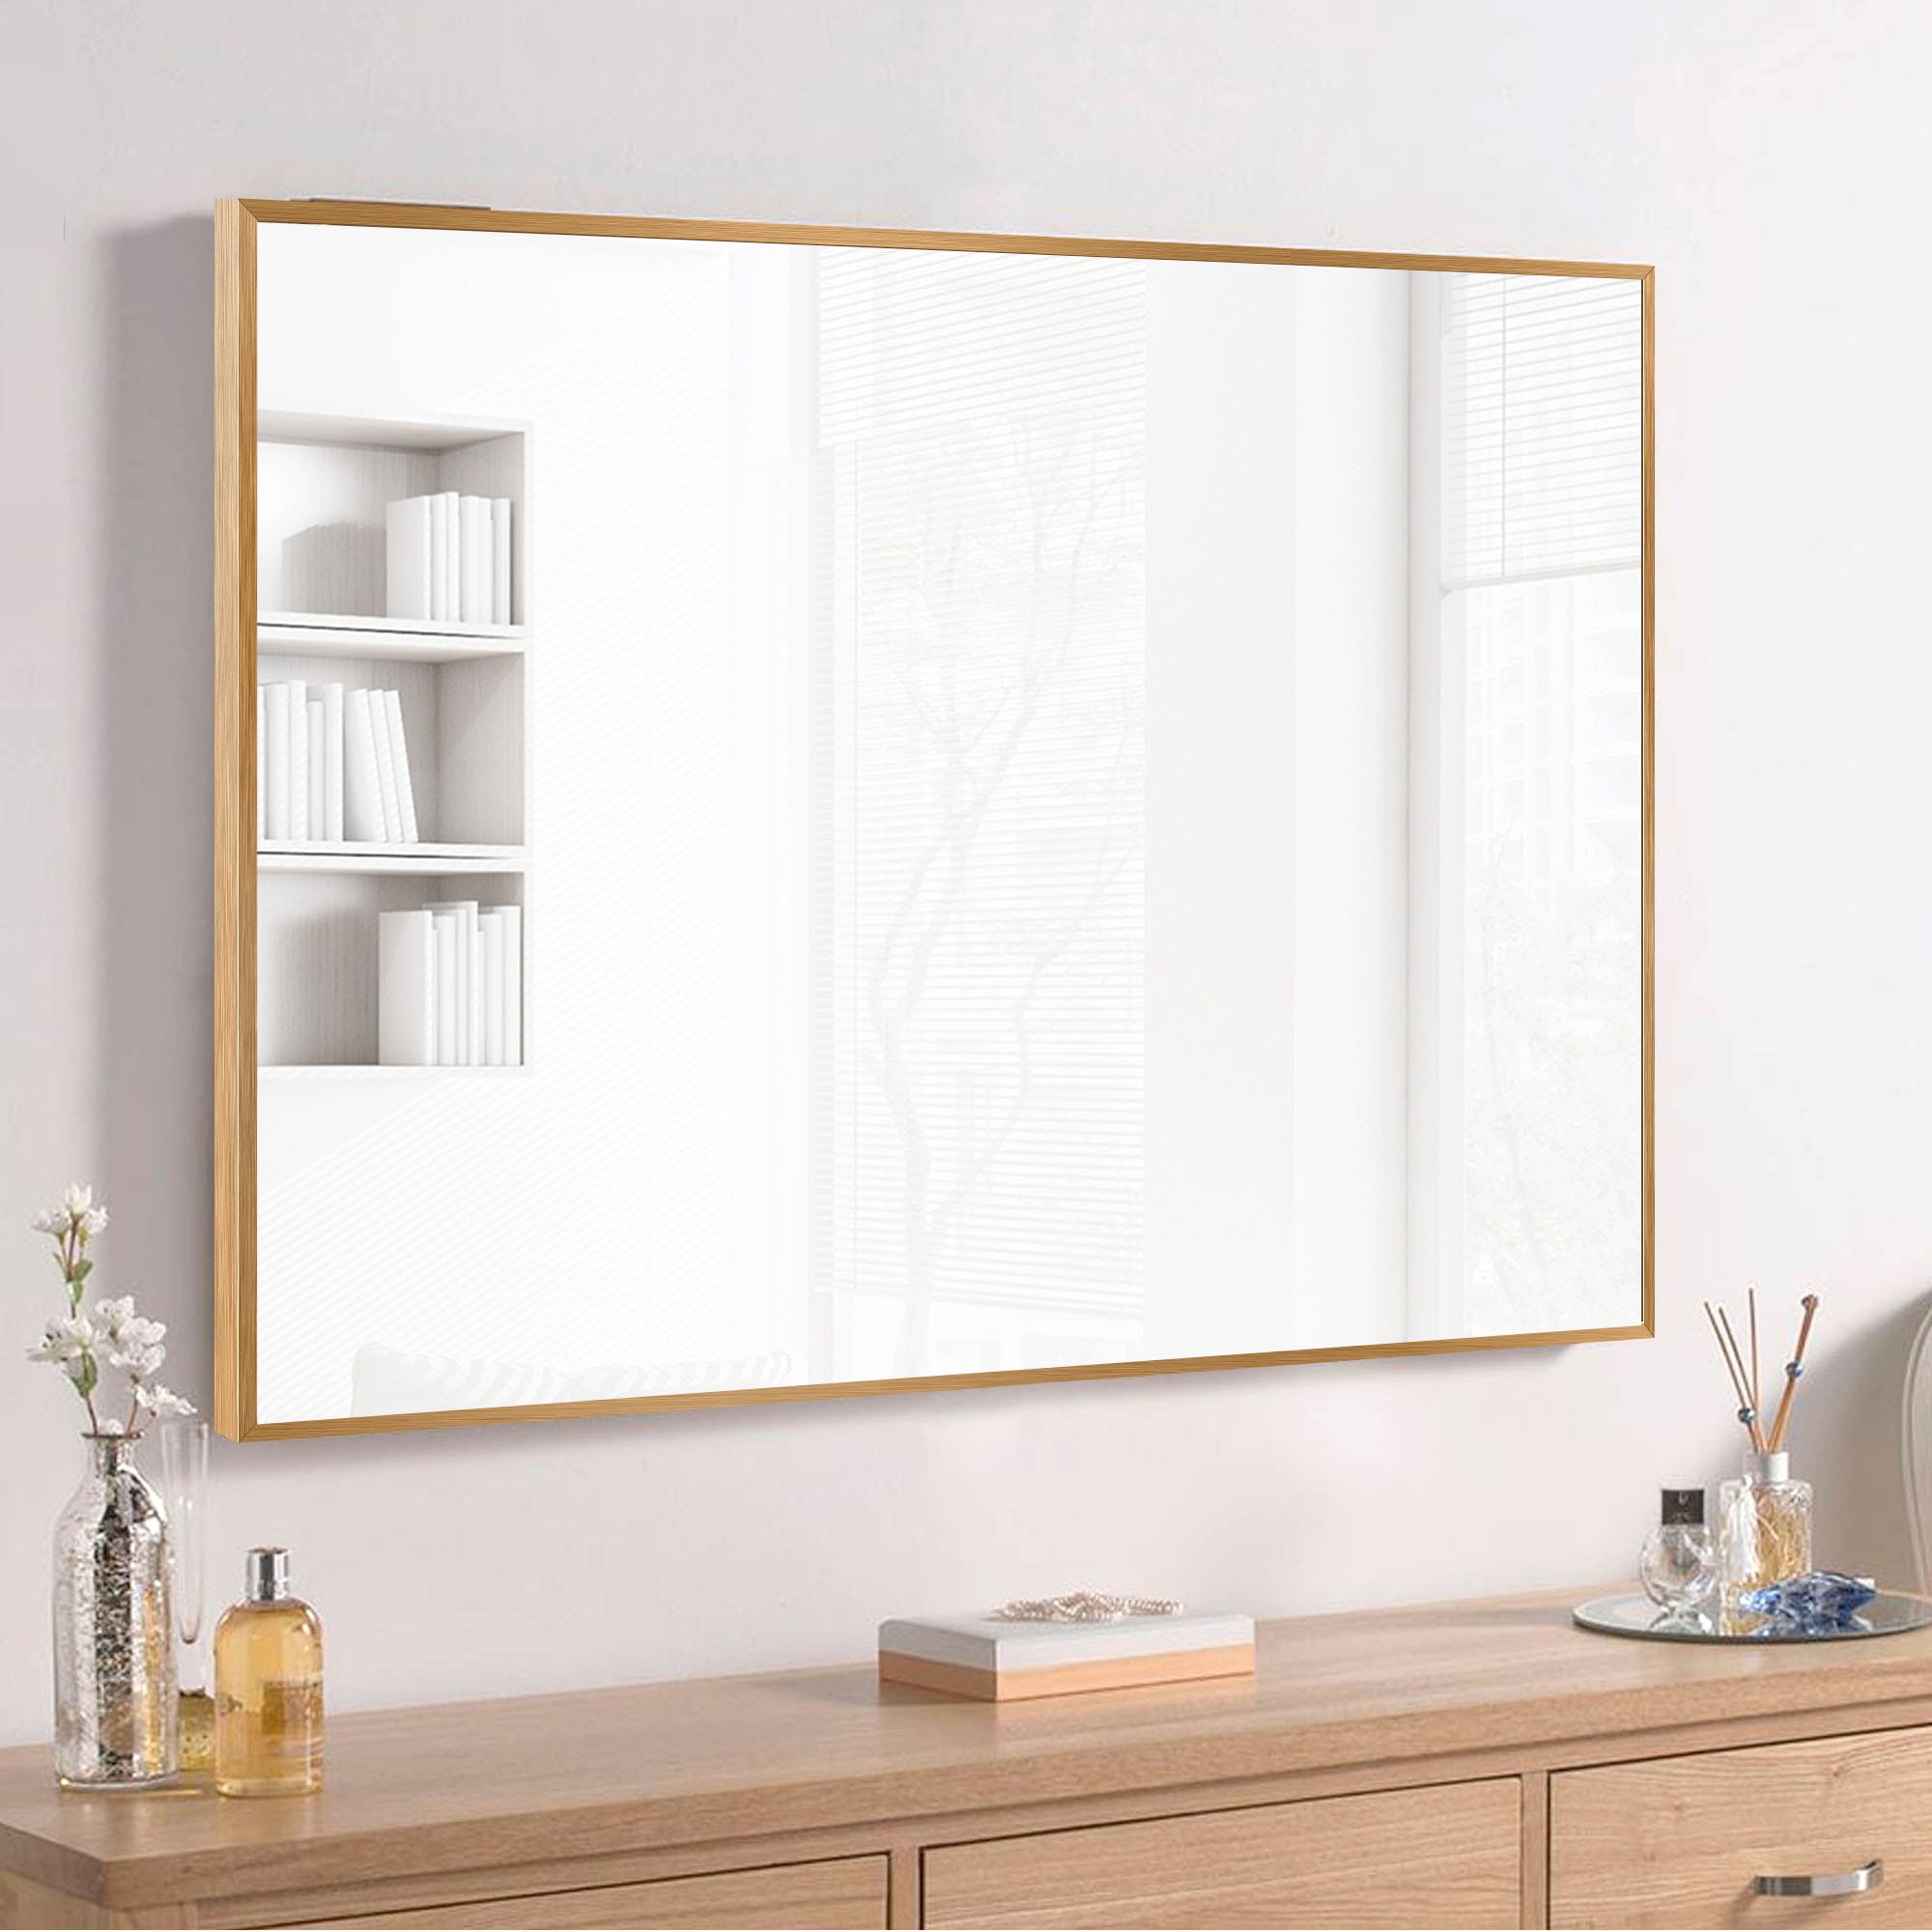 NeuType 35.83-in W x 24.02-in H Gold Framed Wall Mirror at